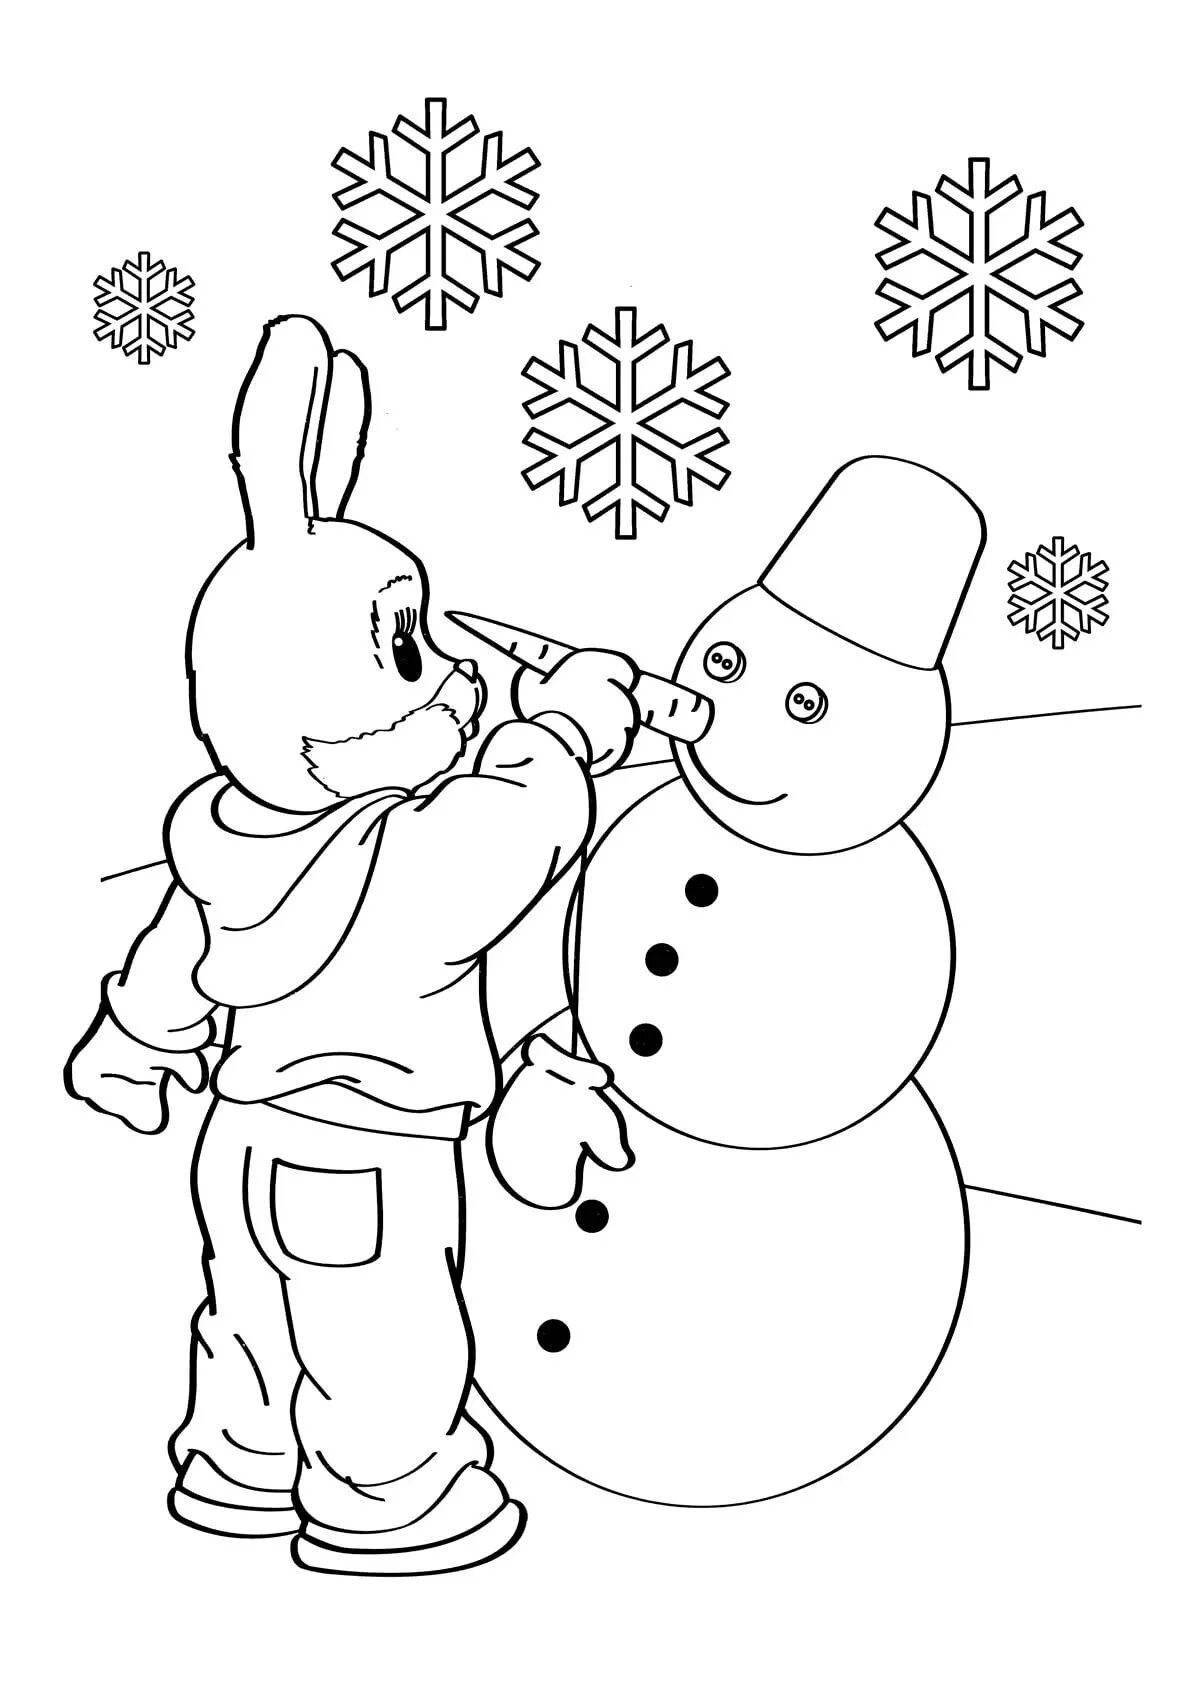 Fantastic winter coloring book for 2-3 year olds